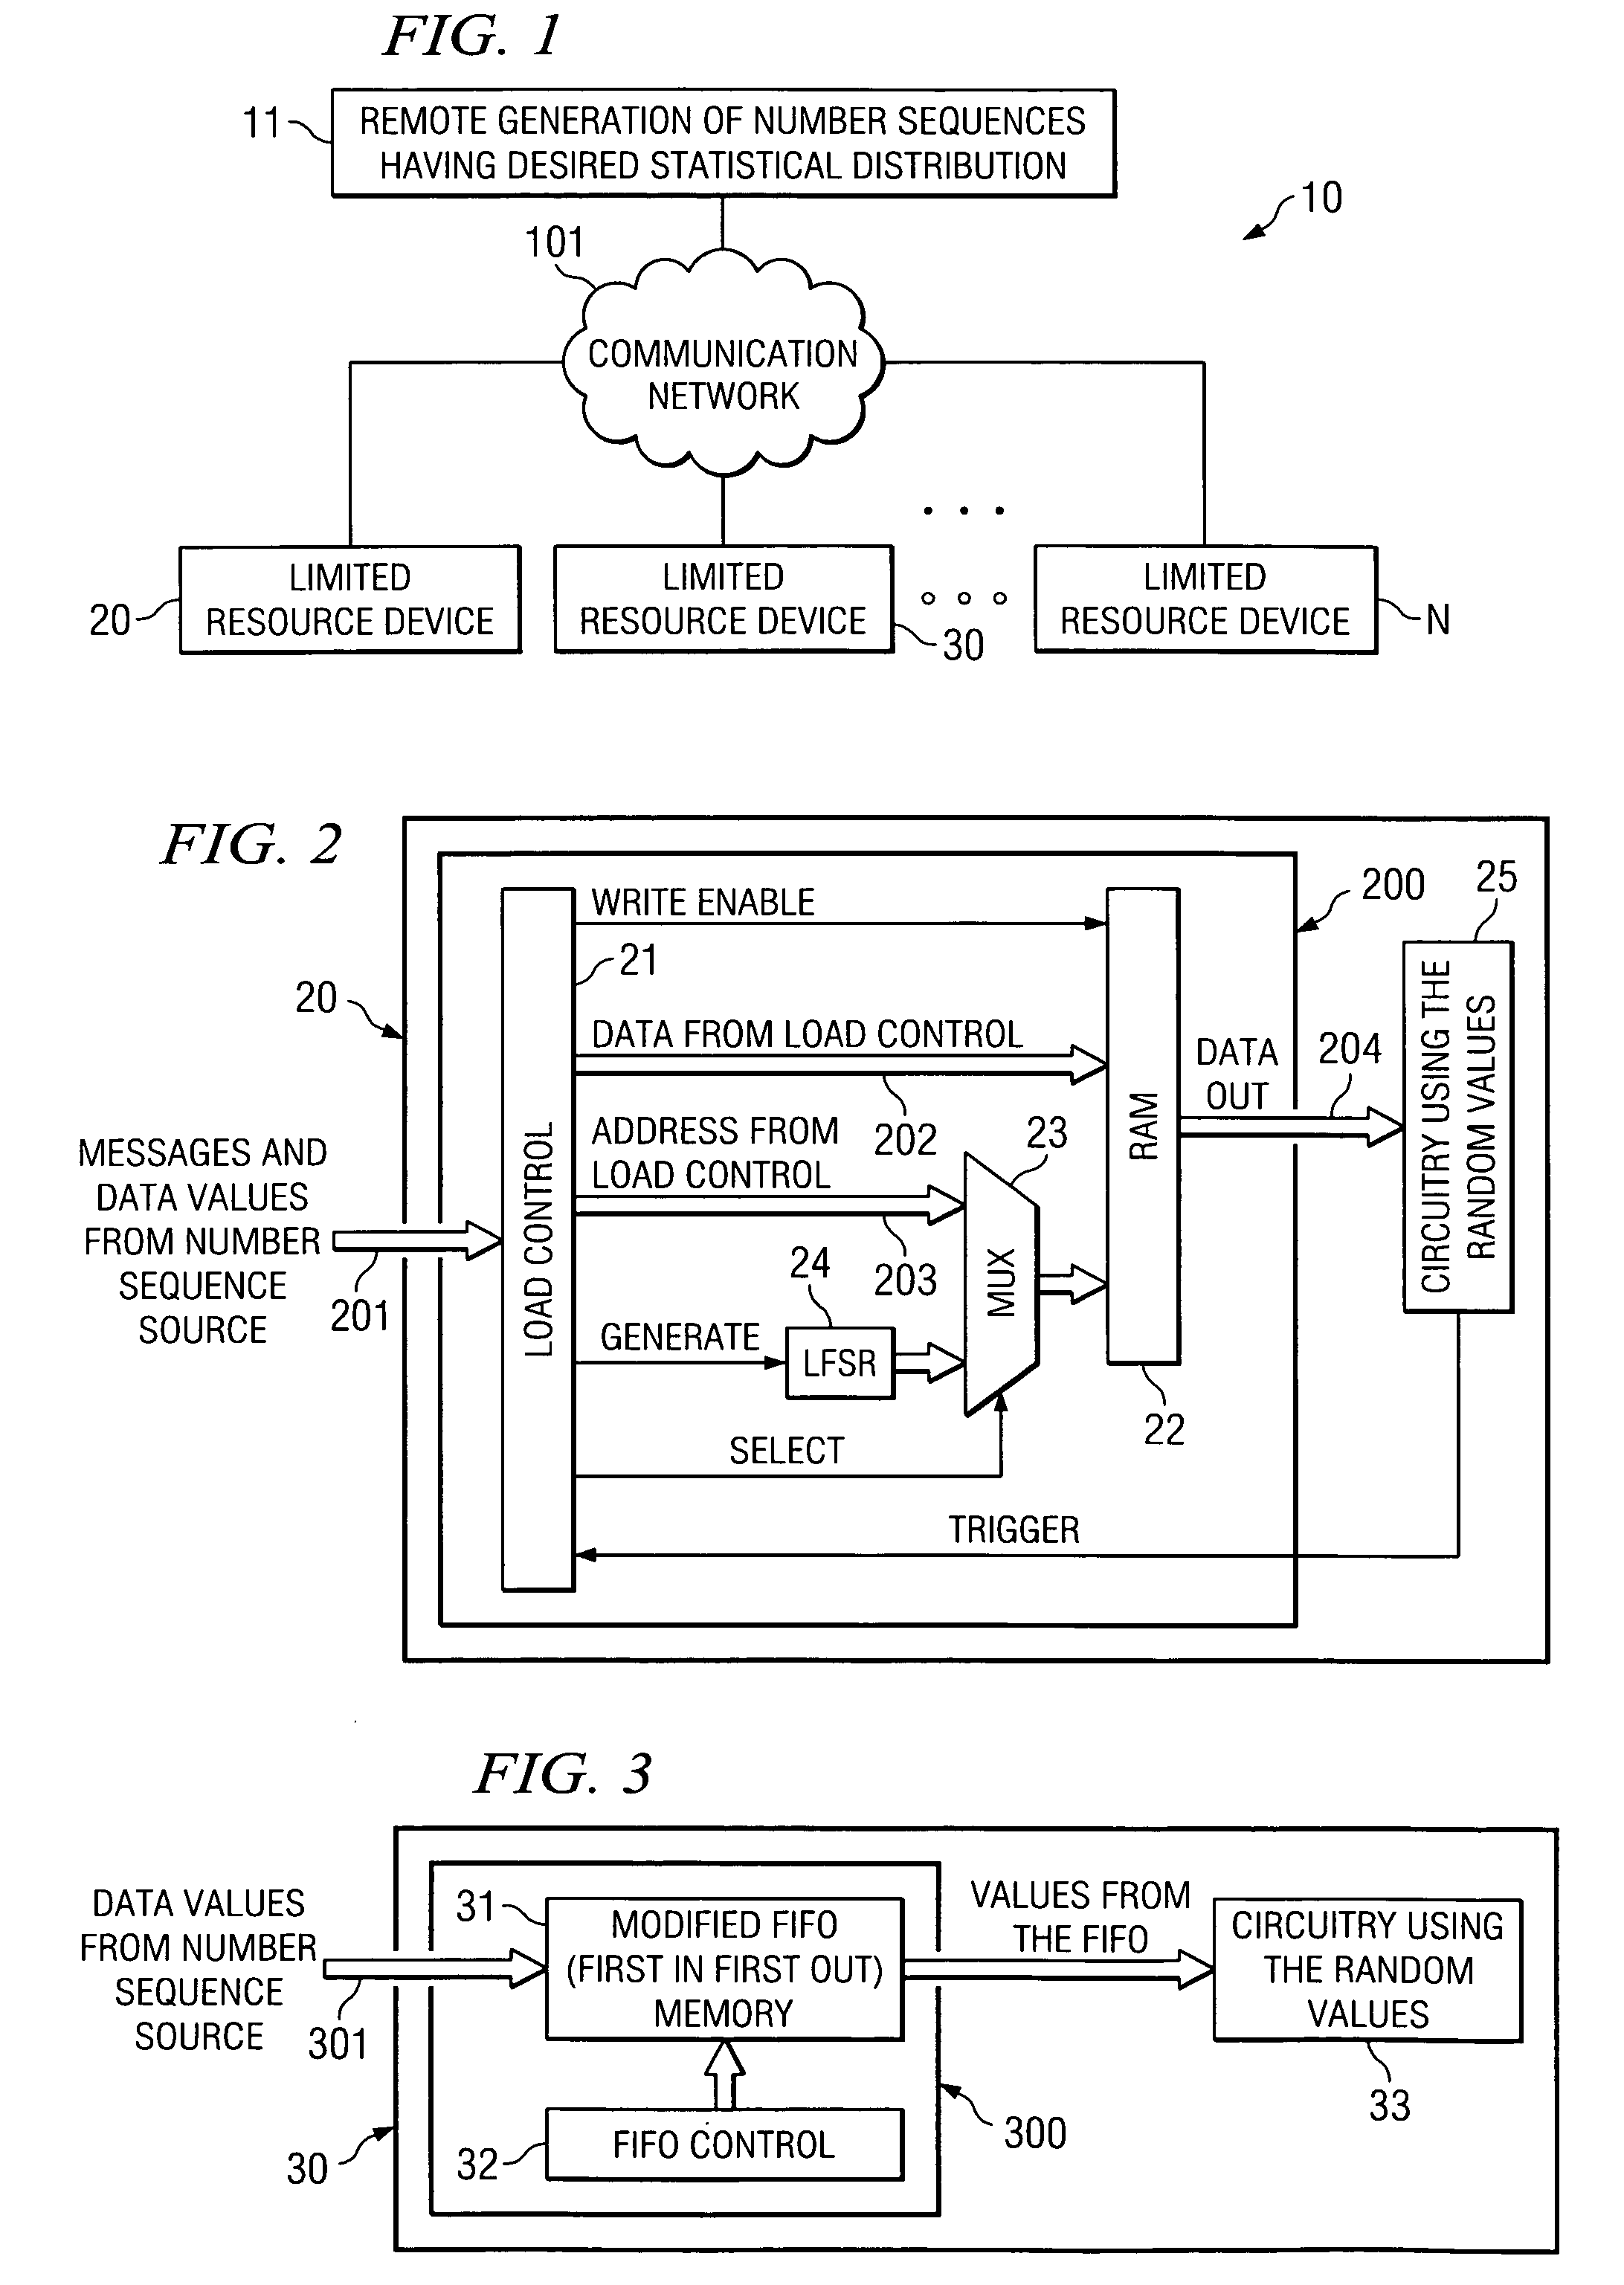 Systems and methods for producing pseudo-random number distributions in devices having limited processing and storage capabilities